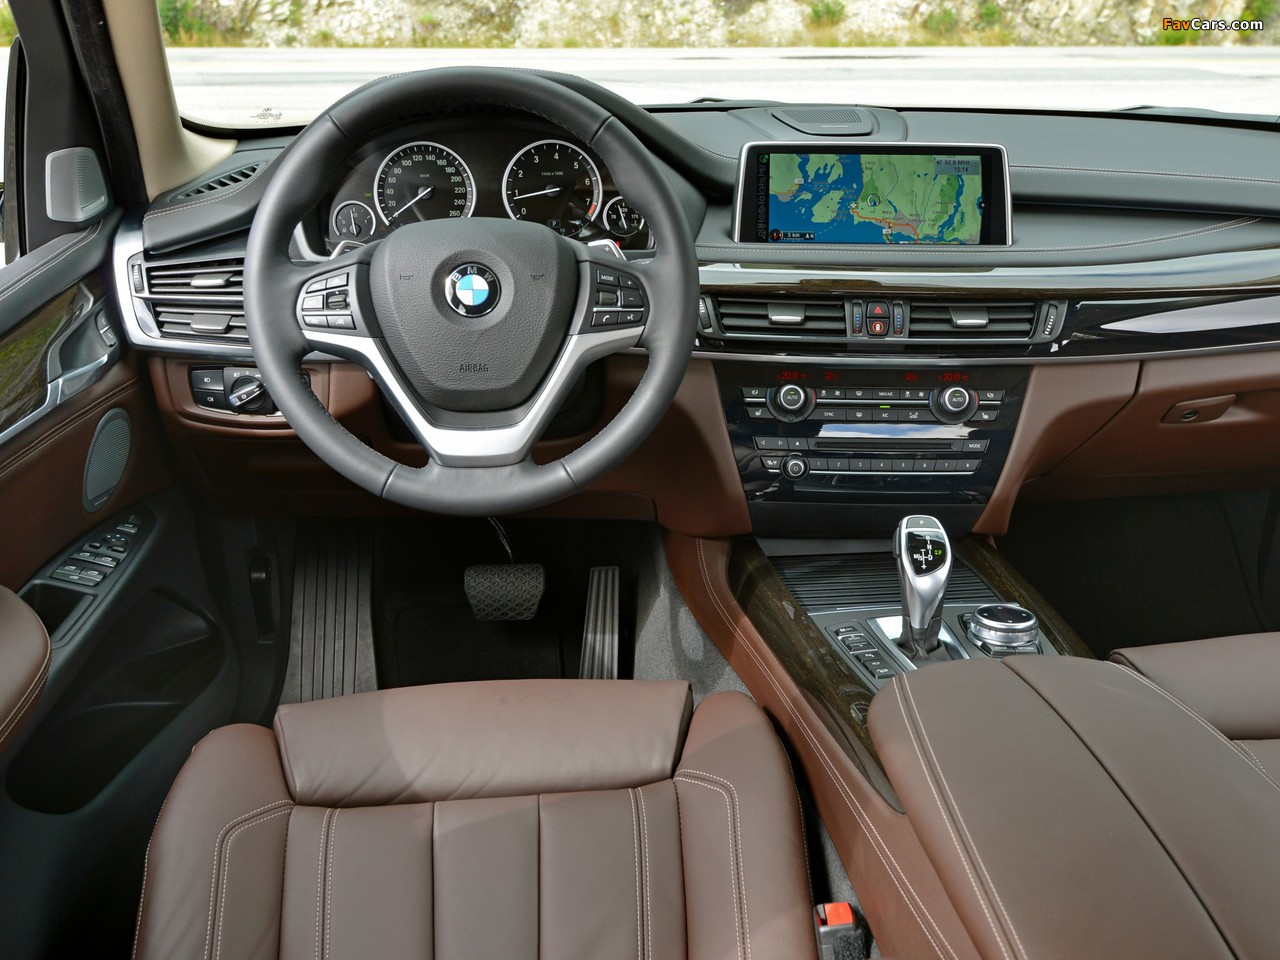 BMW X5 xDrive50i (F15) 2013 pictures (1280 x 960)